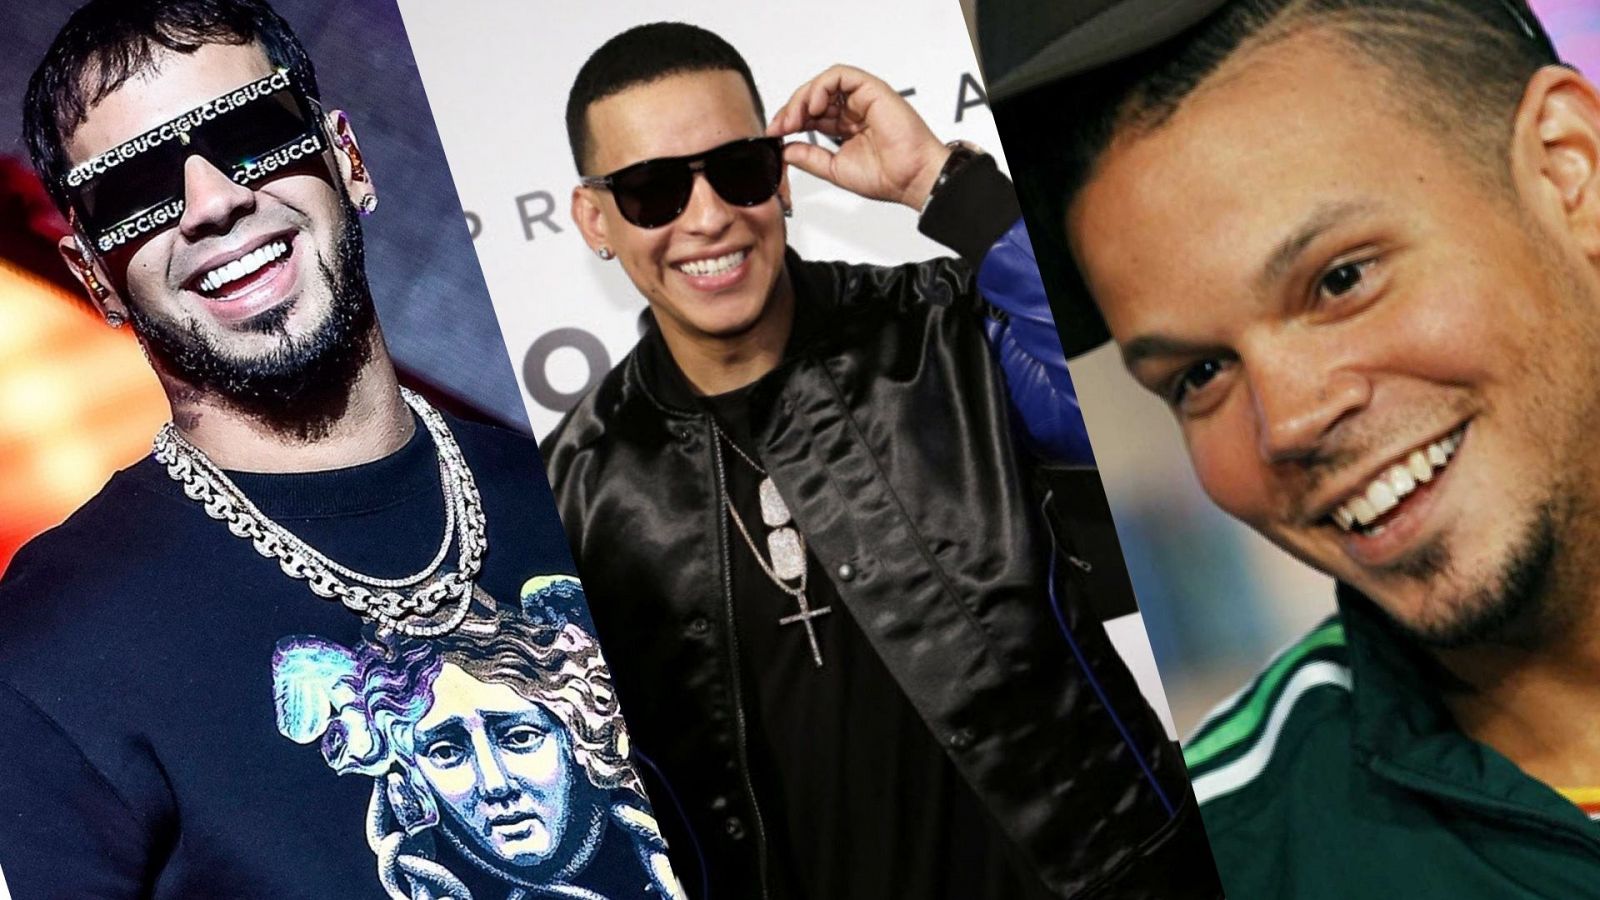 Cosculluela le tira beef a Daddy Yankee, Anuel AA y Residente